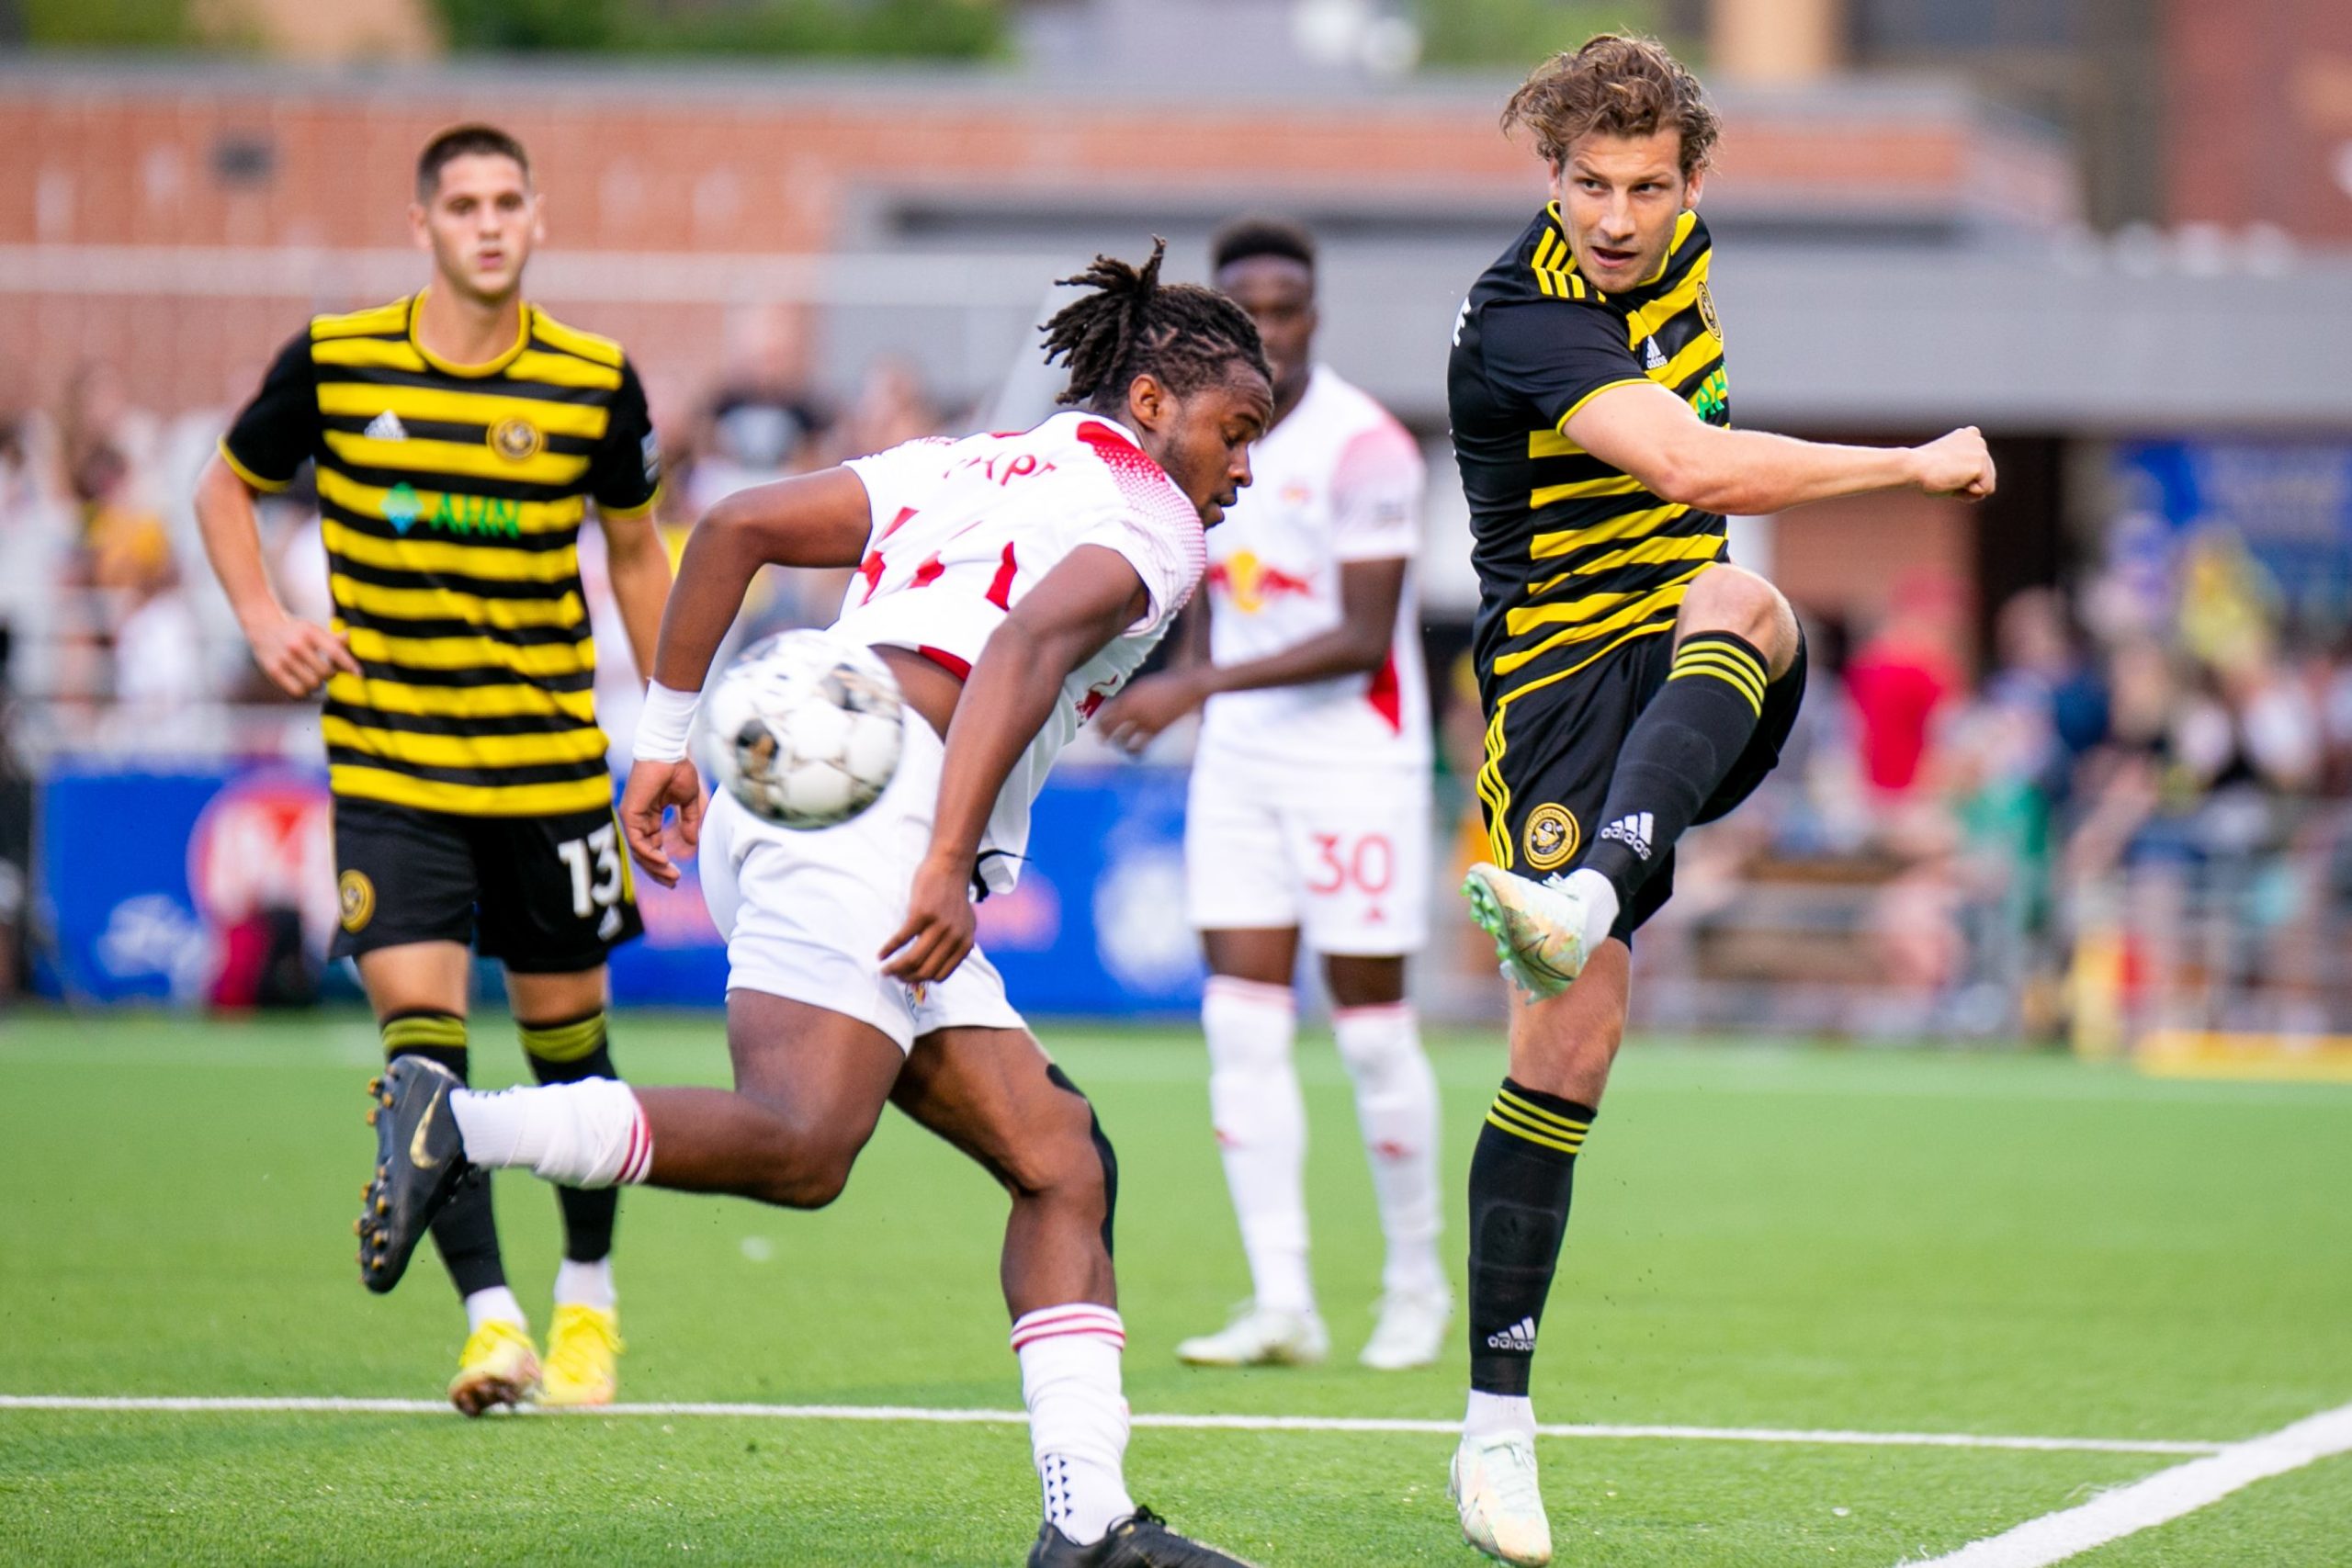 Russell Cicerone kicks the ball past a New York Red Bulls II defender. (Photo: Chris Cowger/Riverhounds SC)